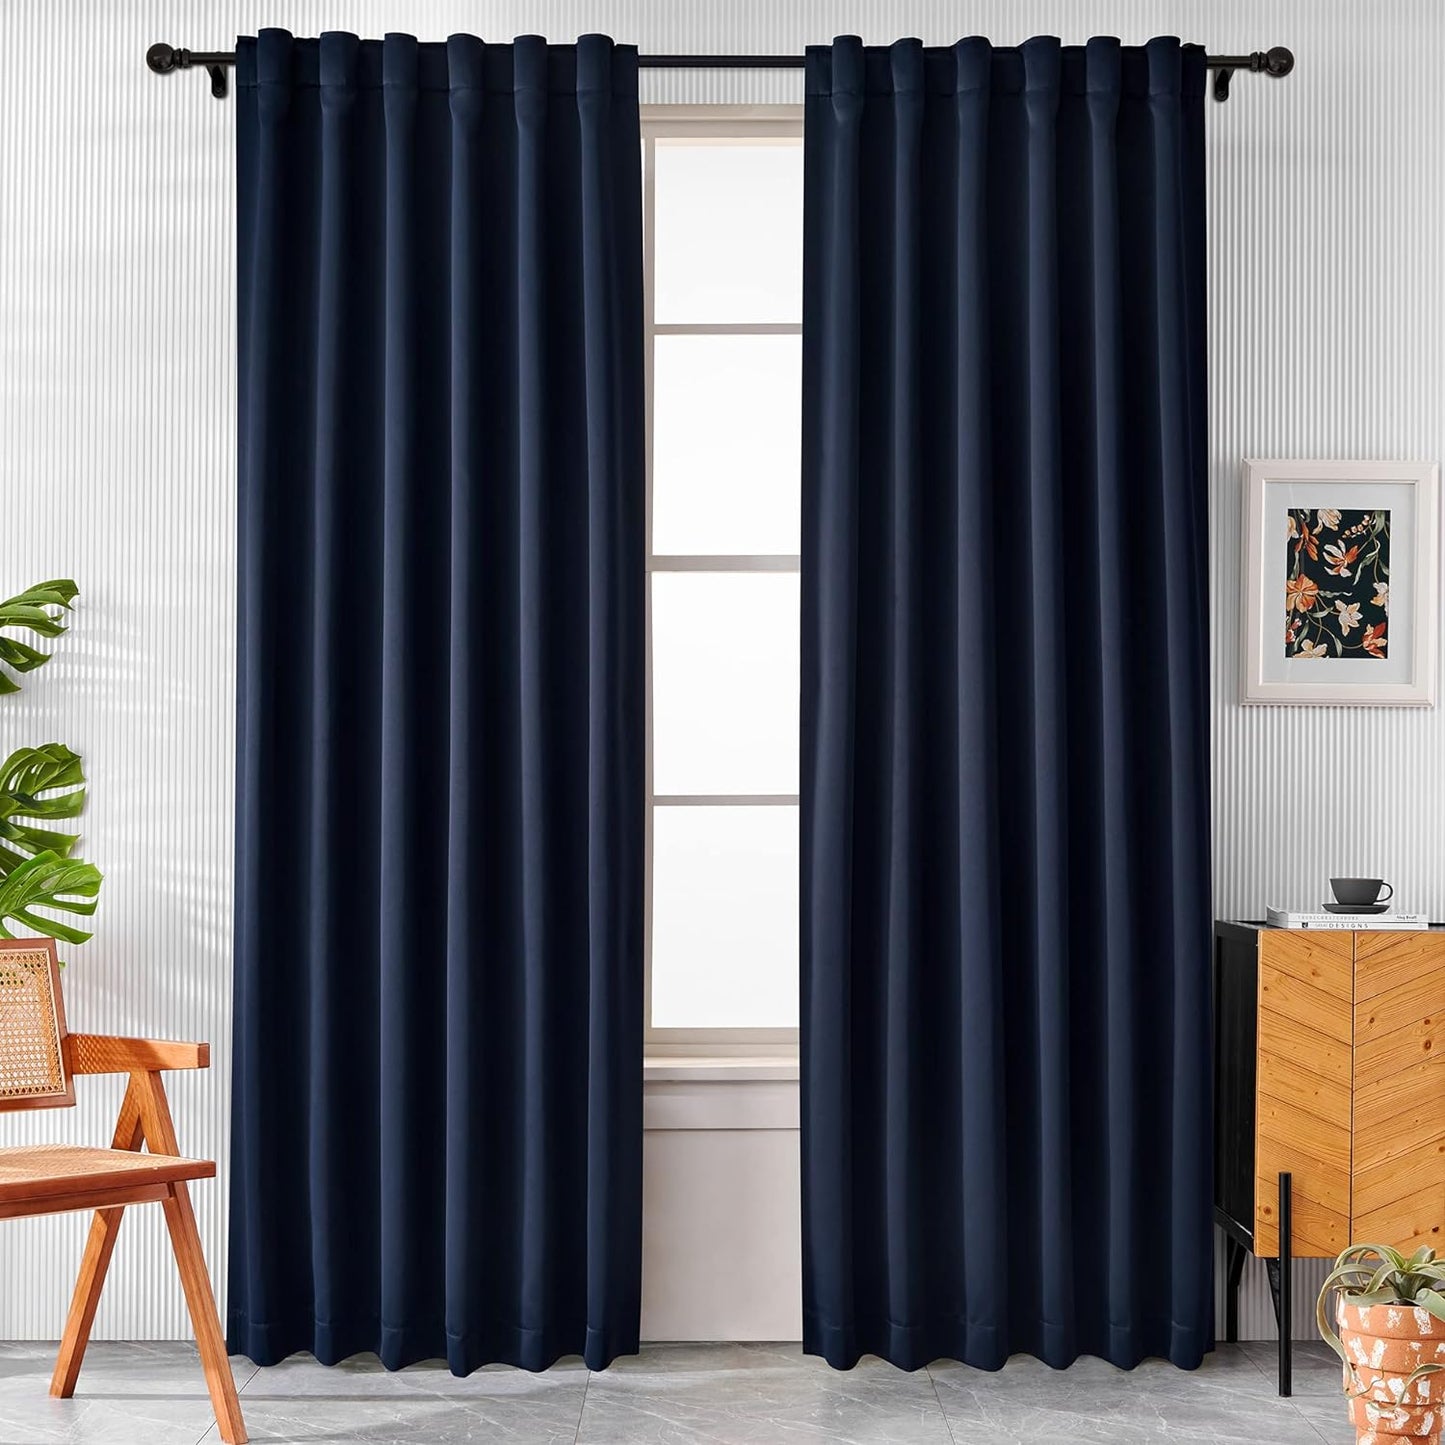 Pickluc Blackout Curtains 96 Inches Long 2 Panels, Black Out Drapes for Bedroom or Living Room, Back Tab and Rod Pocket Top, Set of Two, Dark Grey, 52" Wide and 96" Length.  Pickluc Navy 52"W X 84"L 